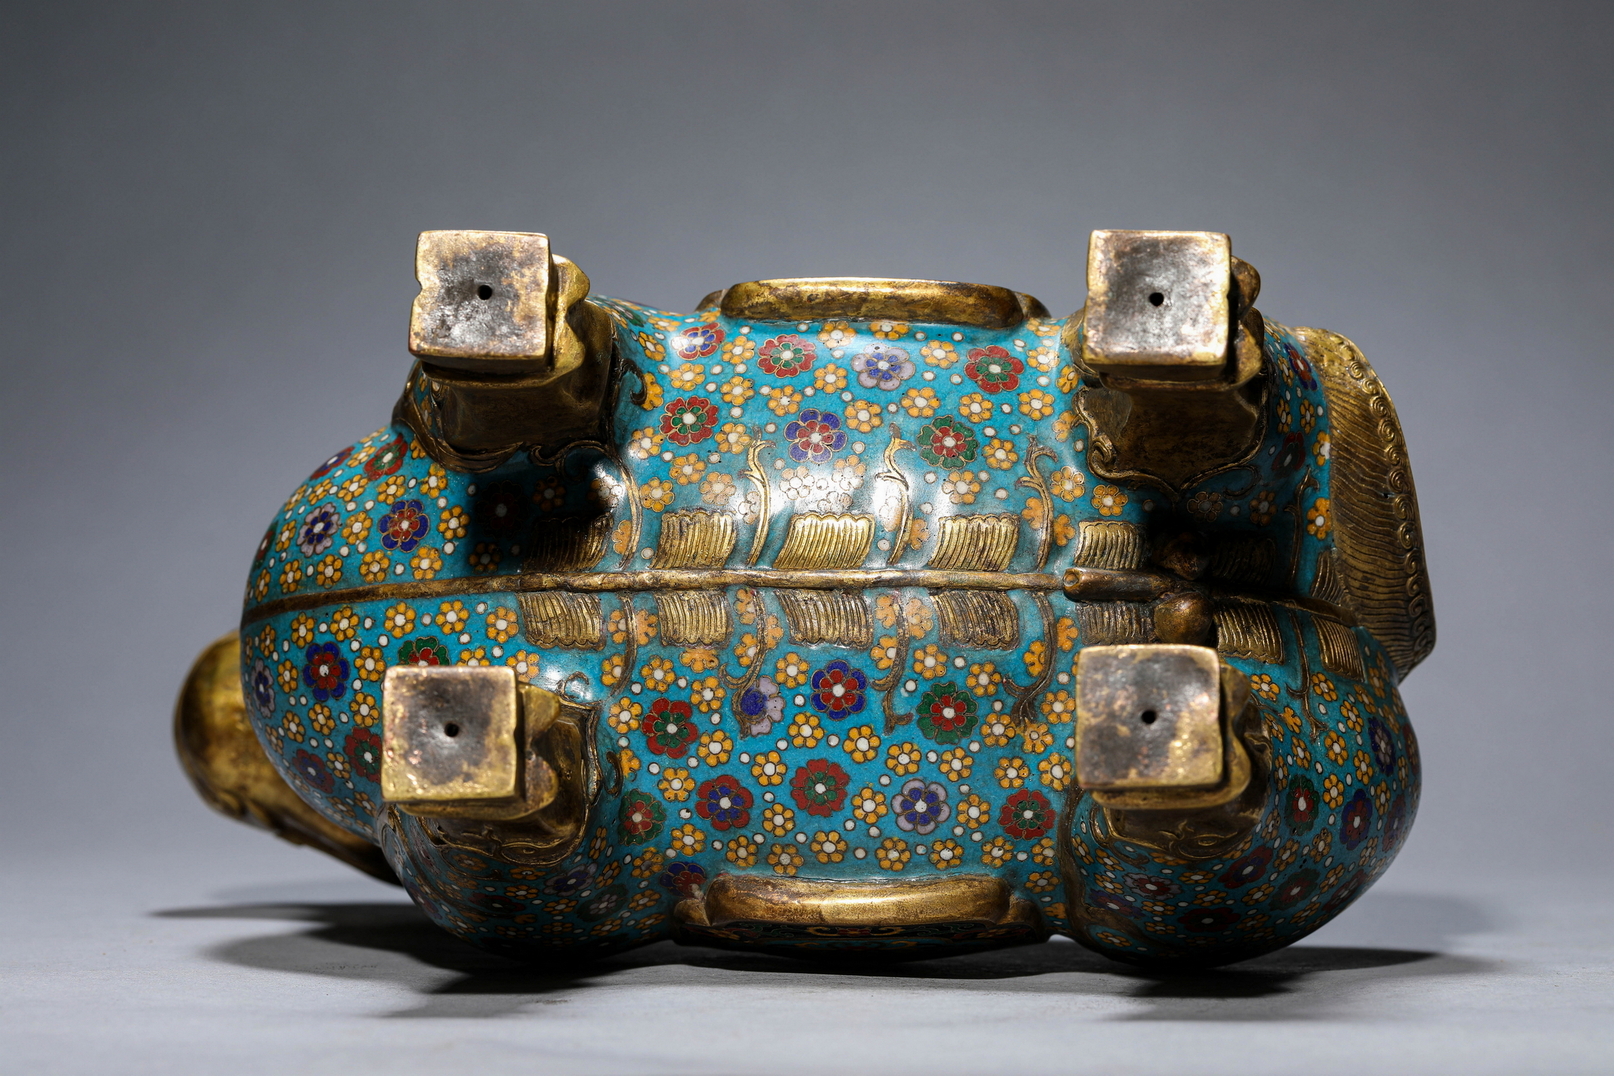 FINE CHINESE CLOISONNE, 17TH/18TH Century Pr.  Collection of NARA private gallary.  - Image 7 of 7